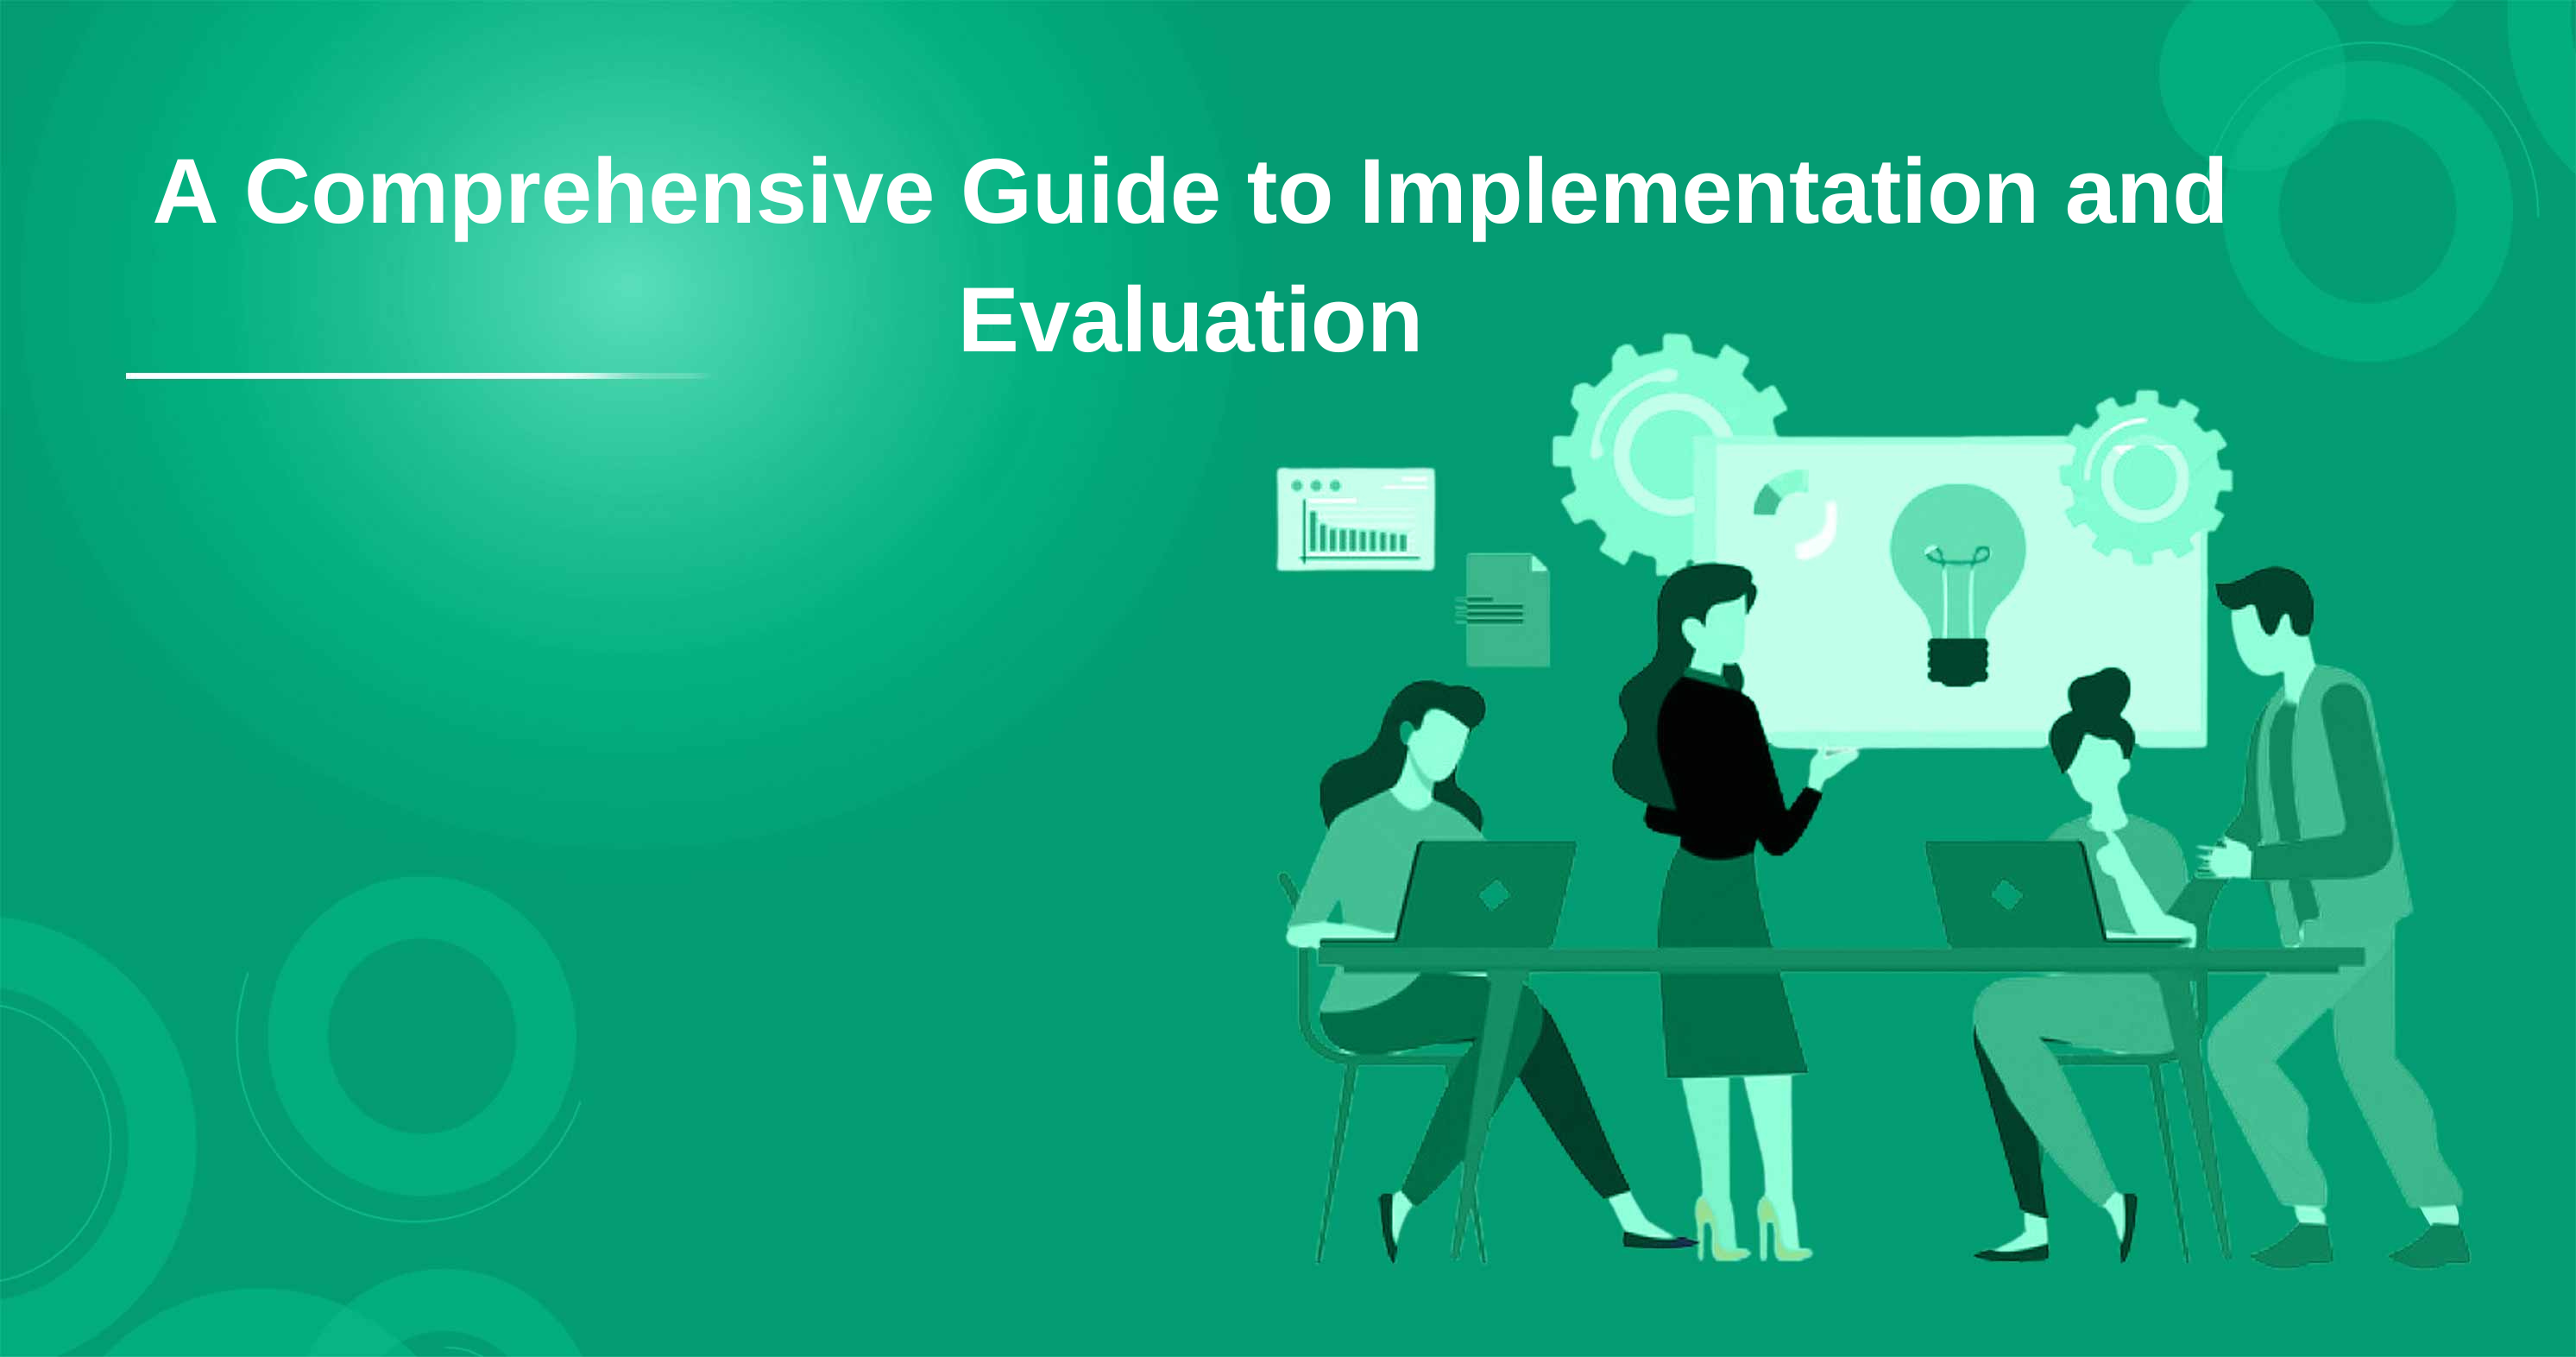 A Comprehensive Guide to Implementation and Evaluation